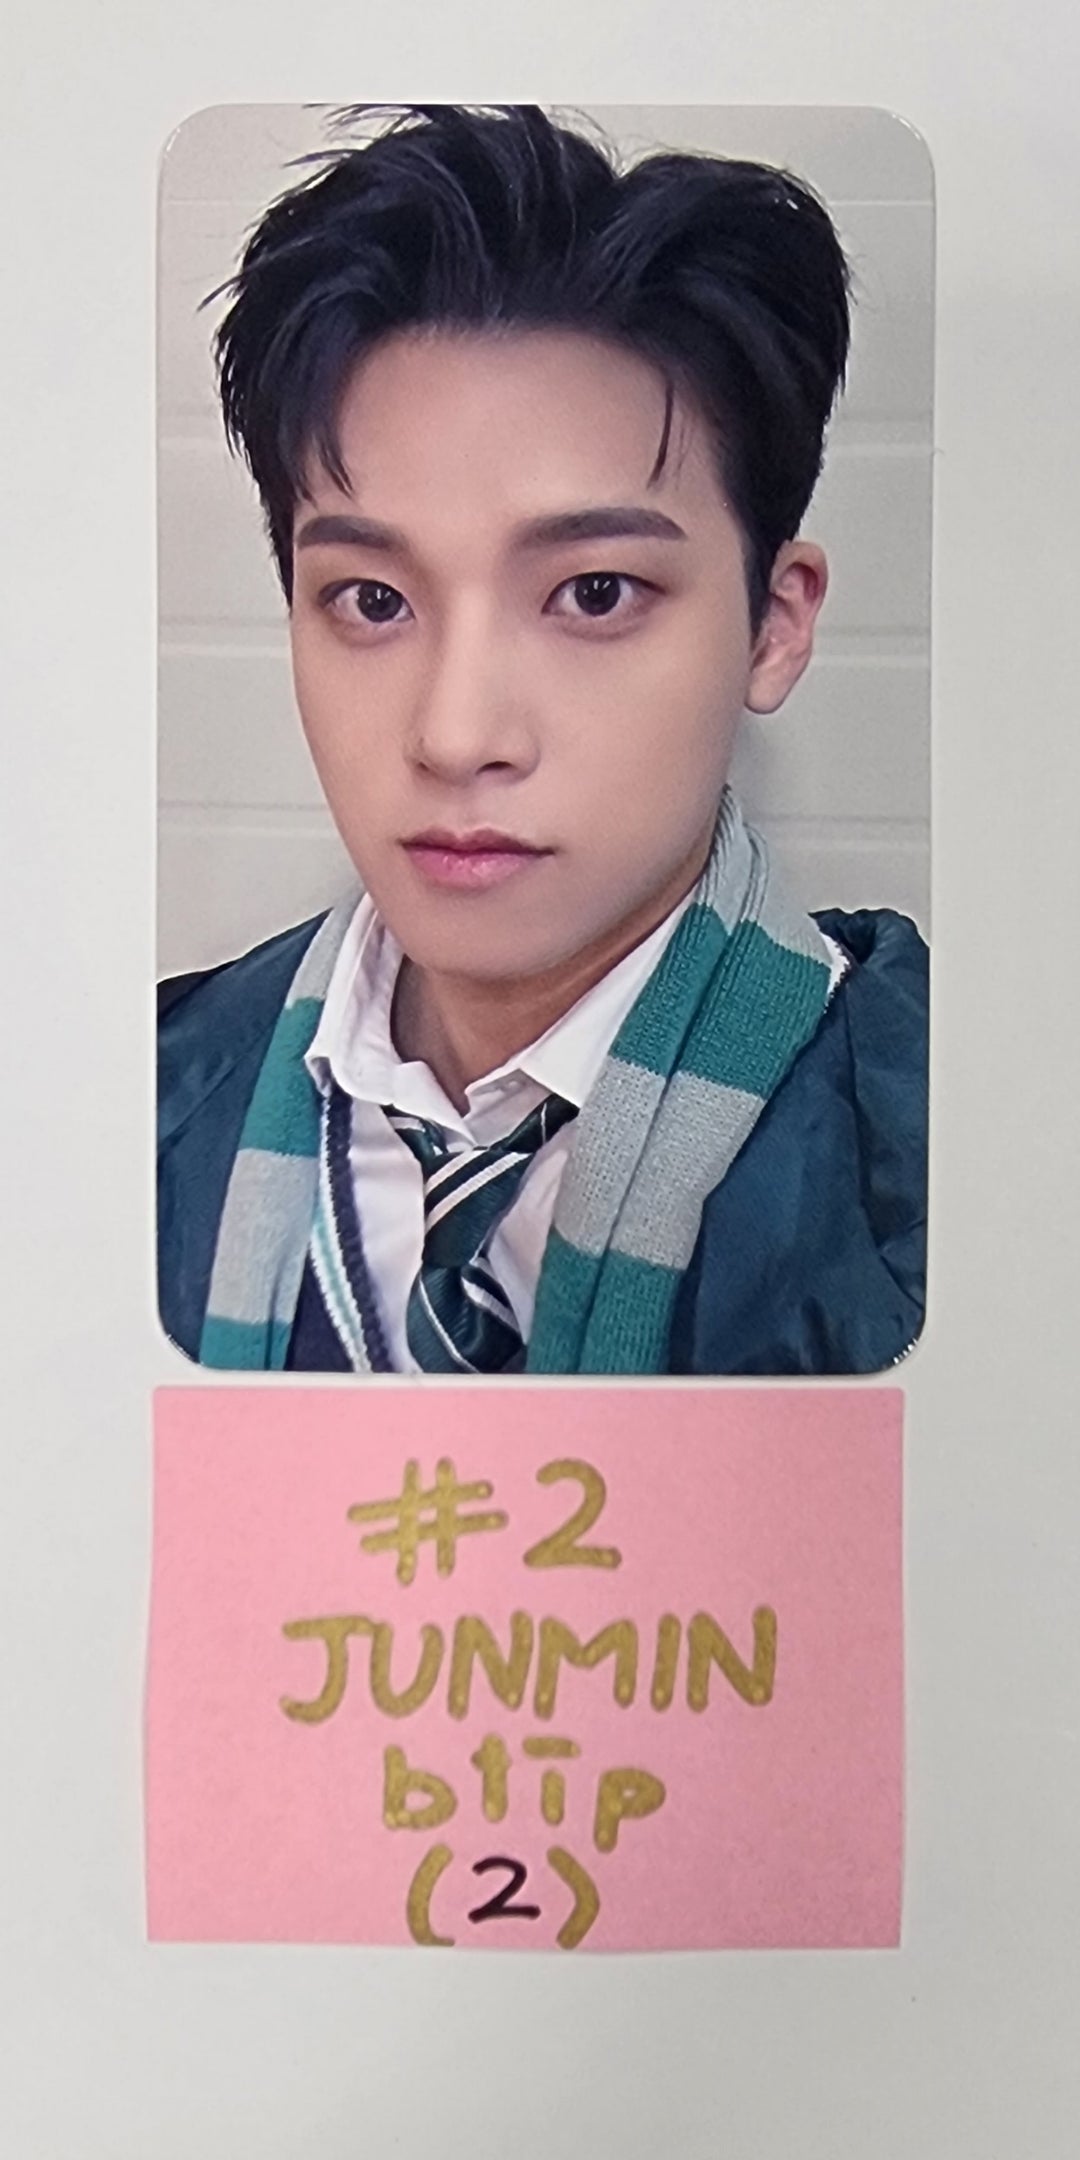 Xikers "Tricky Delivery" - Blip Fansign Event Photocard